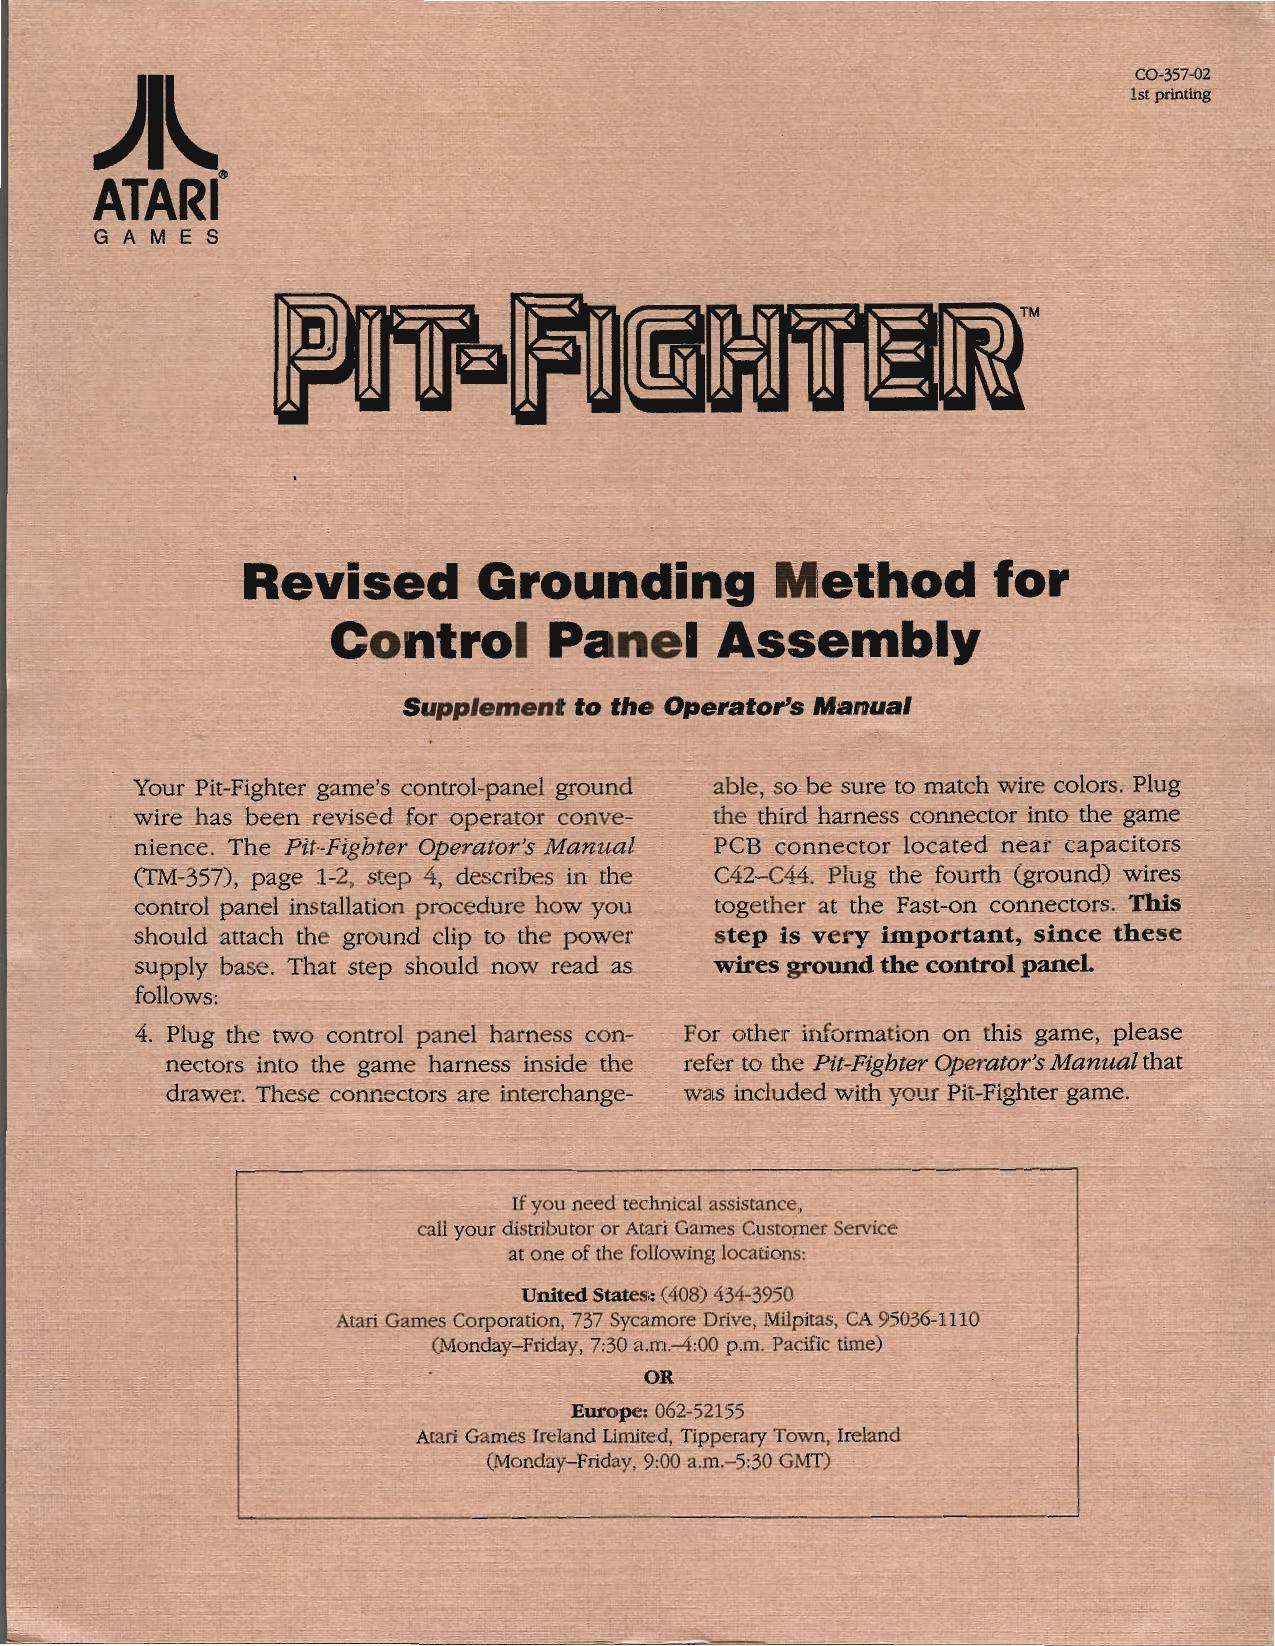 Pit-Fighter CO-357-02 1st Printing